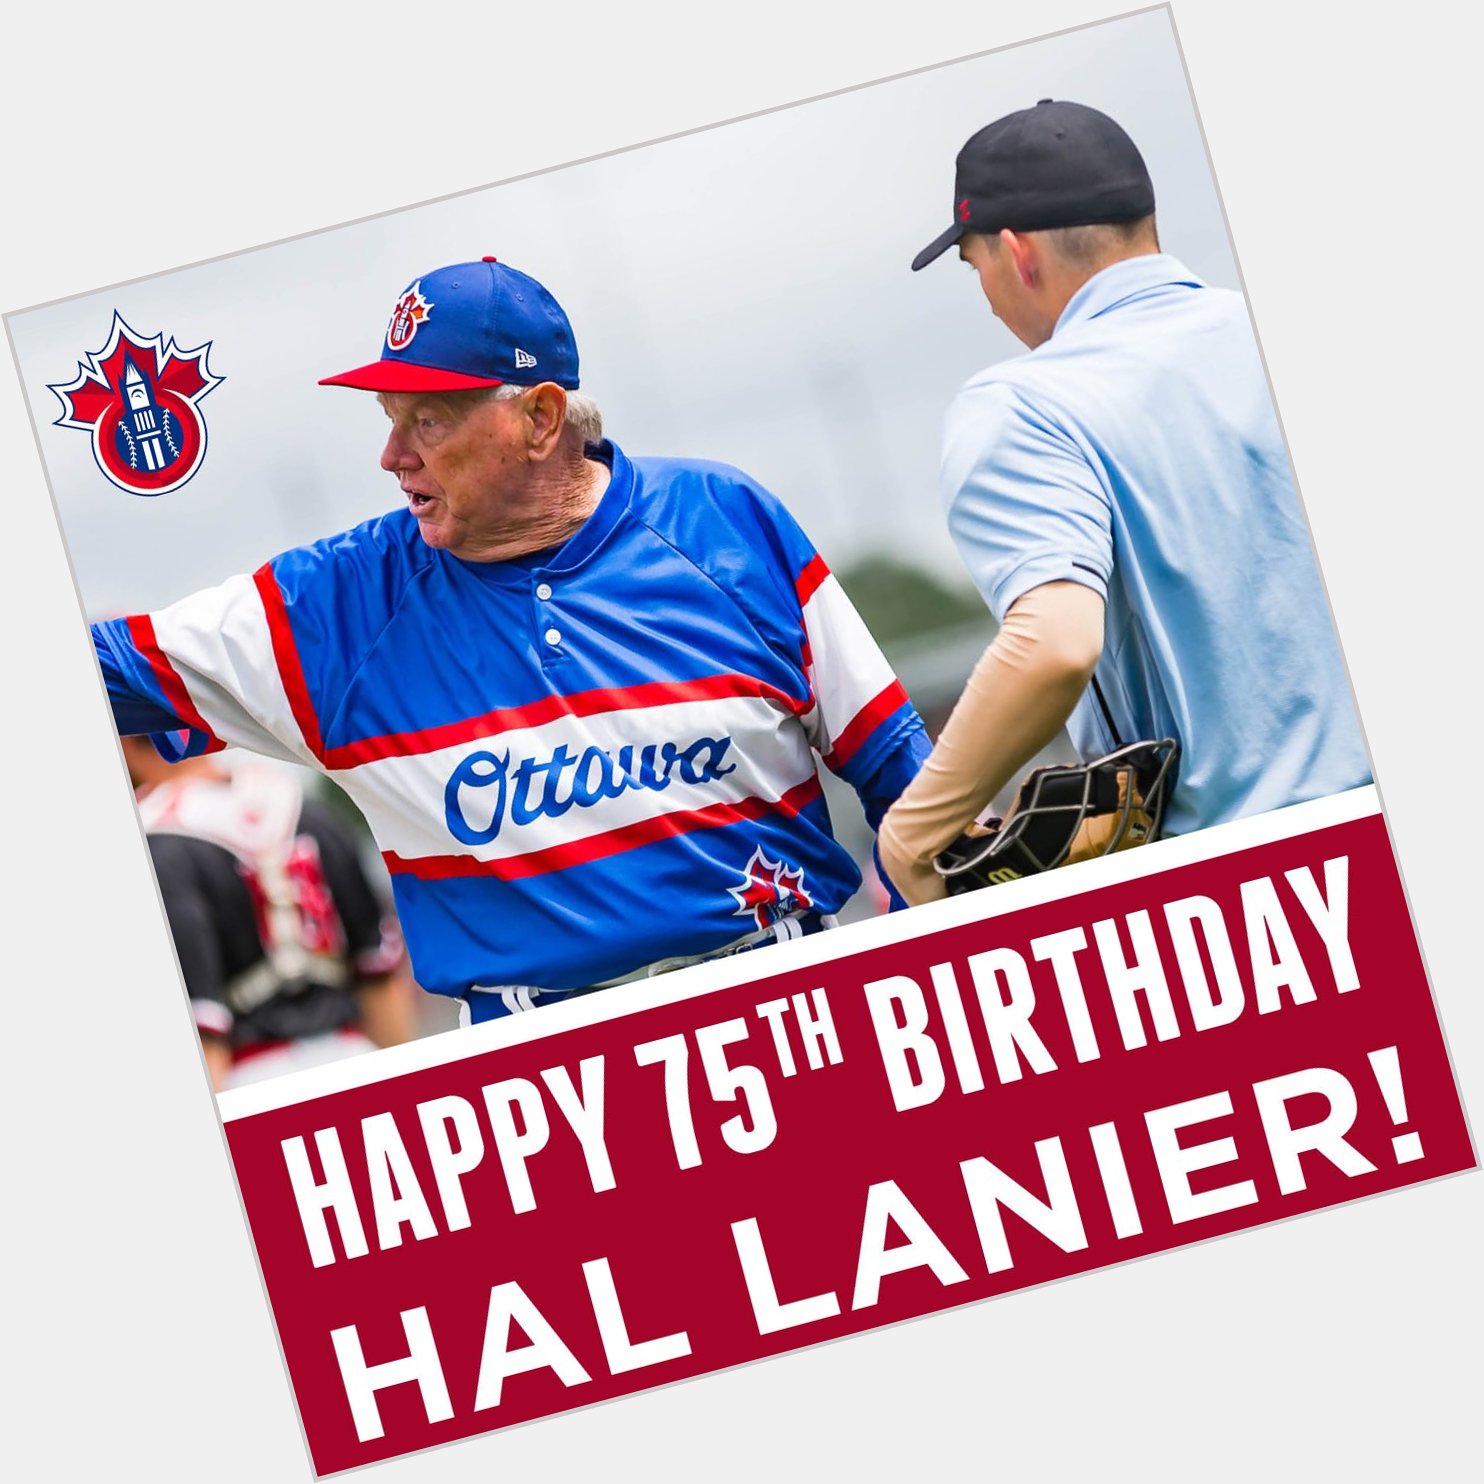 We\re sure America is honoured to share a birthday with the one and only Hal Lanier!

Happy birthday, Hal.   